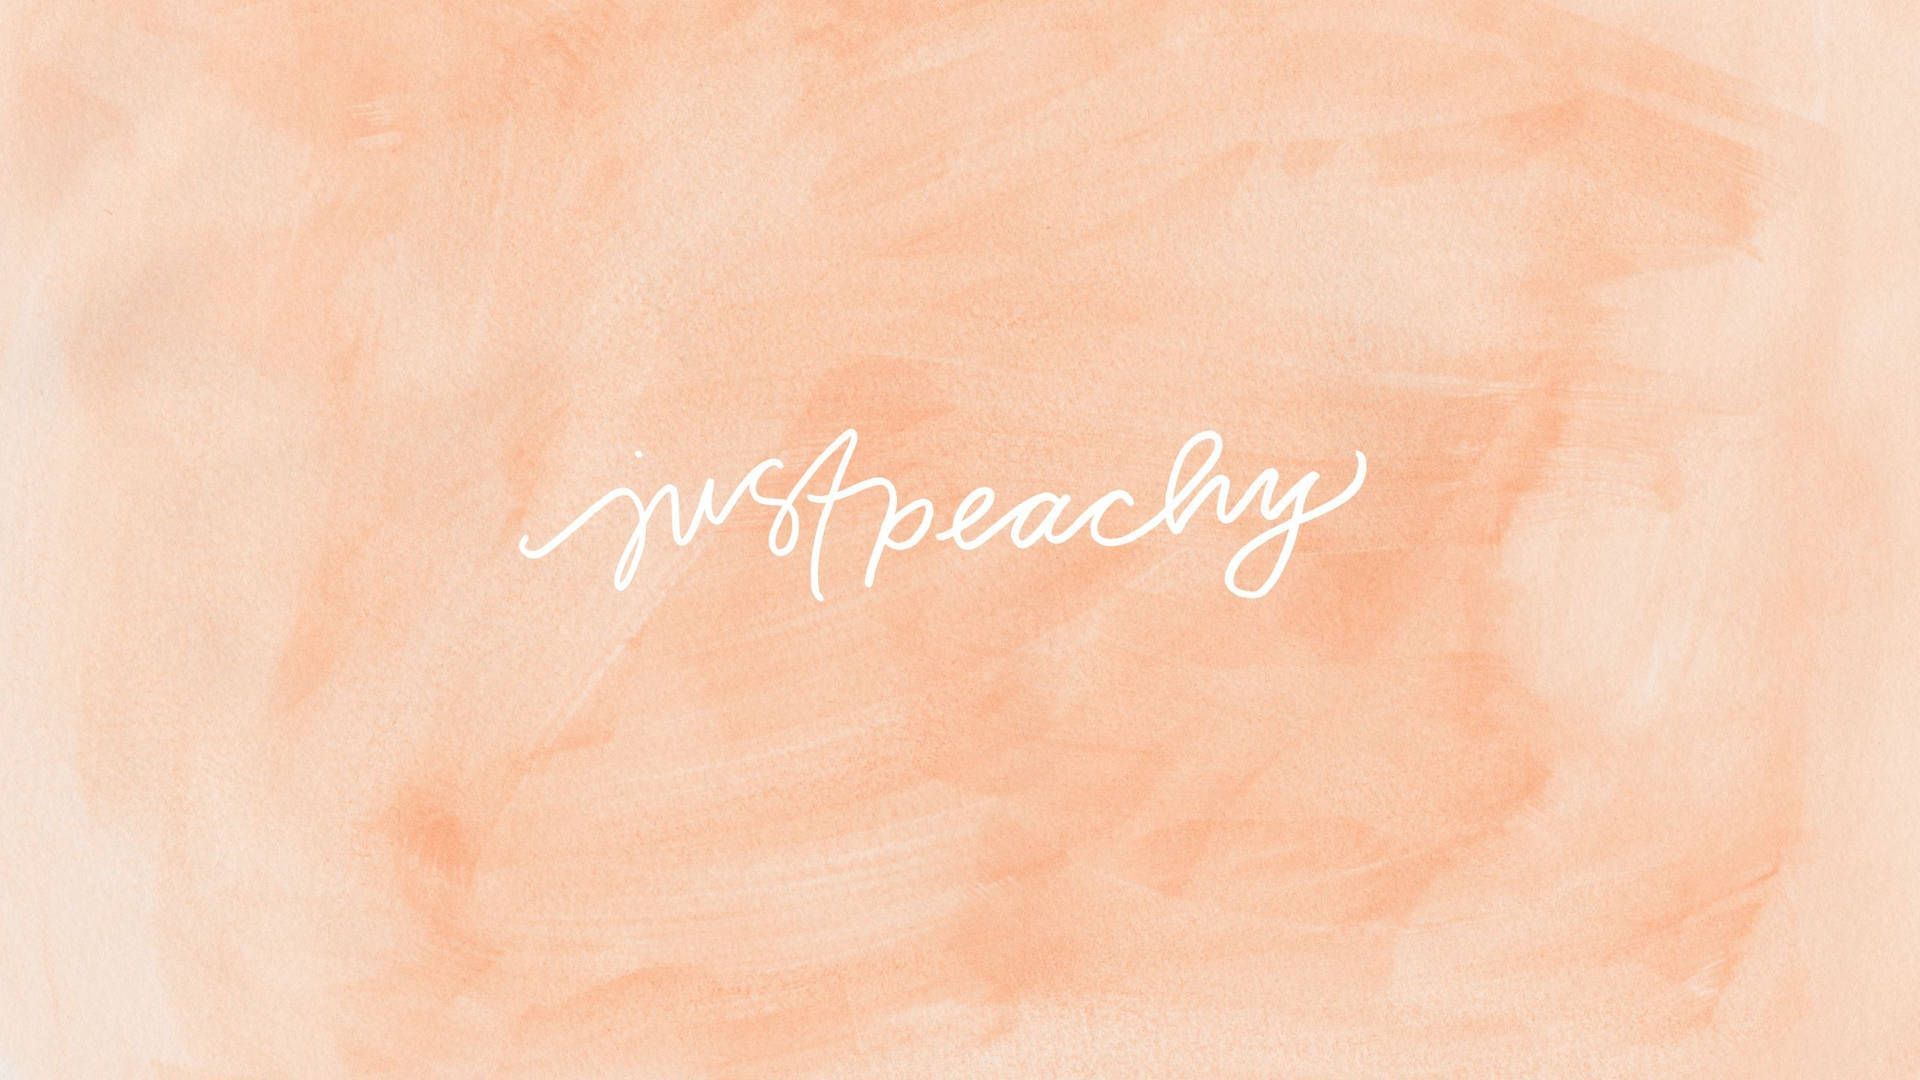 Free Peach Color Aesthetic Wallpaper Downloads, Peach Color Aesthetic Wallpaper for FREE